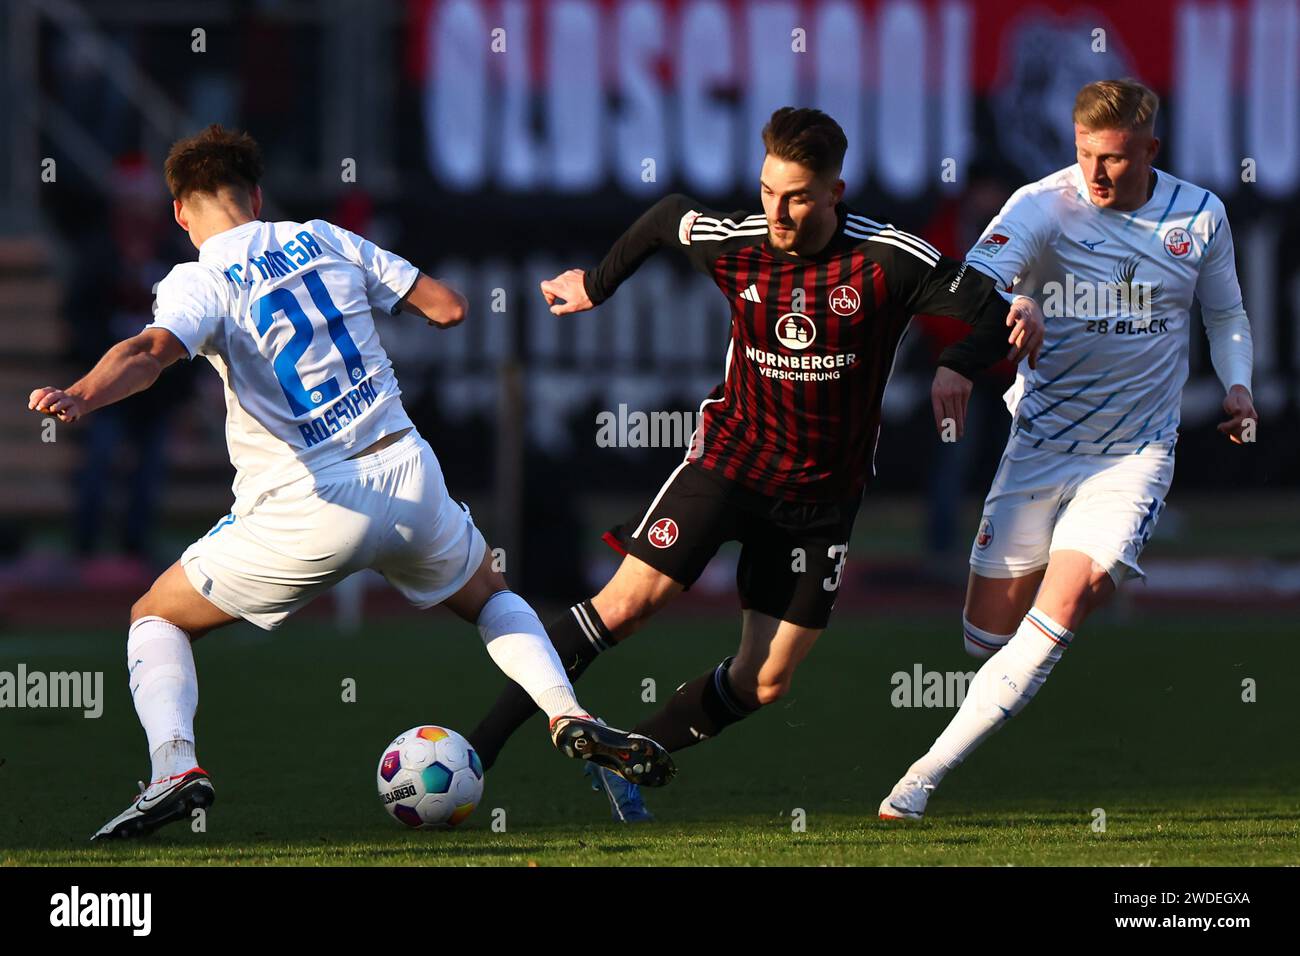 Nuremberg, Germany. 20th Jan, 2024. Soccer: Bundesliga 2, 1. FC Nuremberg - Hansa Rostock, matchday 18 at the Max Morlock Stadium. Nuremberg's Lukas Schleimer (center) battles for the ball with Hansa Rostock's Alexander Rossipal (left). Credit: Daniel Karmann/dpa - IMPORTANT NOTE: In accordance with the regulations of the DFL German Football League and the DFB German Football Association, it is prohibited to utilize or have utilized photographs taken in the stadium and/or of the match in the form of sequential images and/or video-like photo series./dpa/Alamy Live News Stock Photo